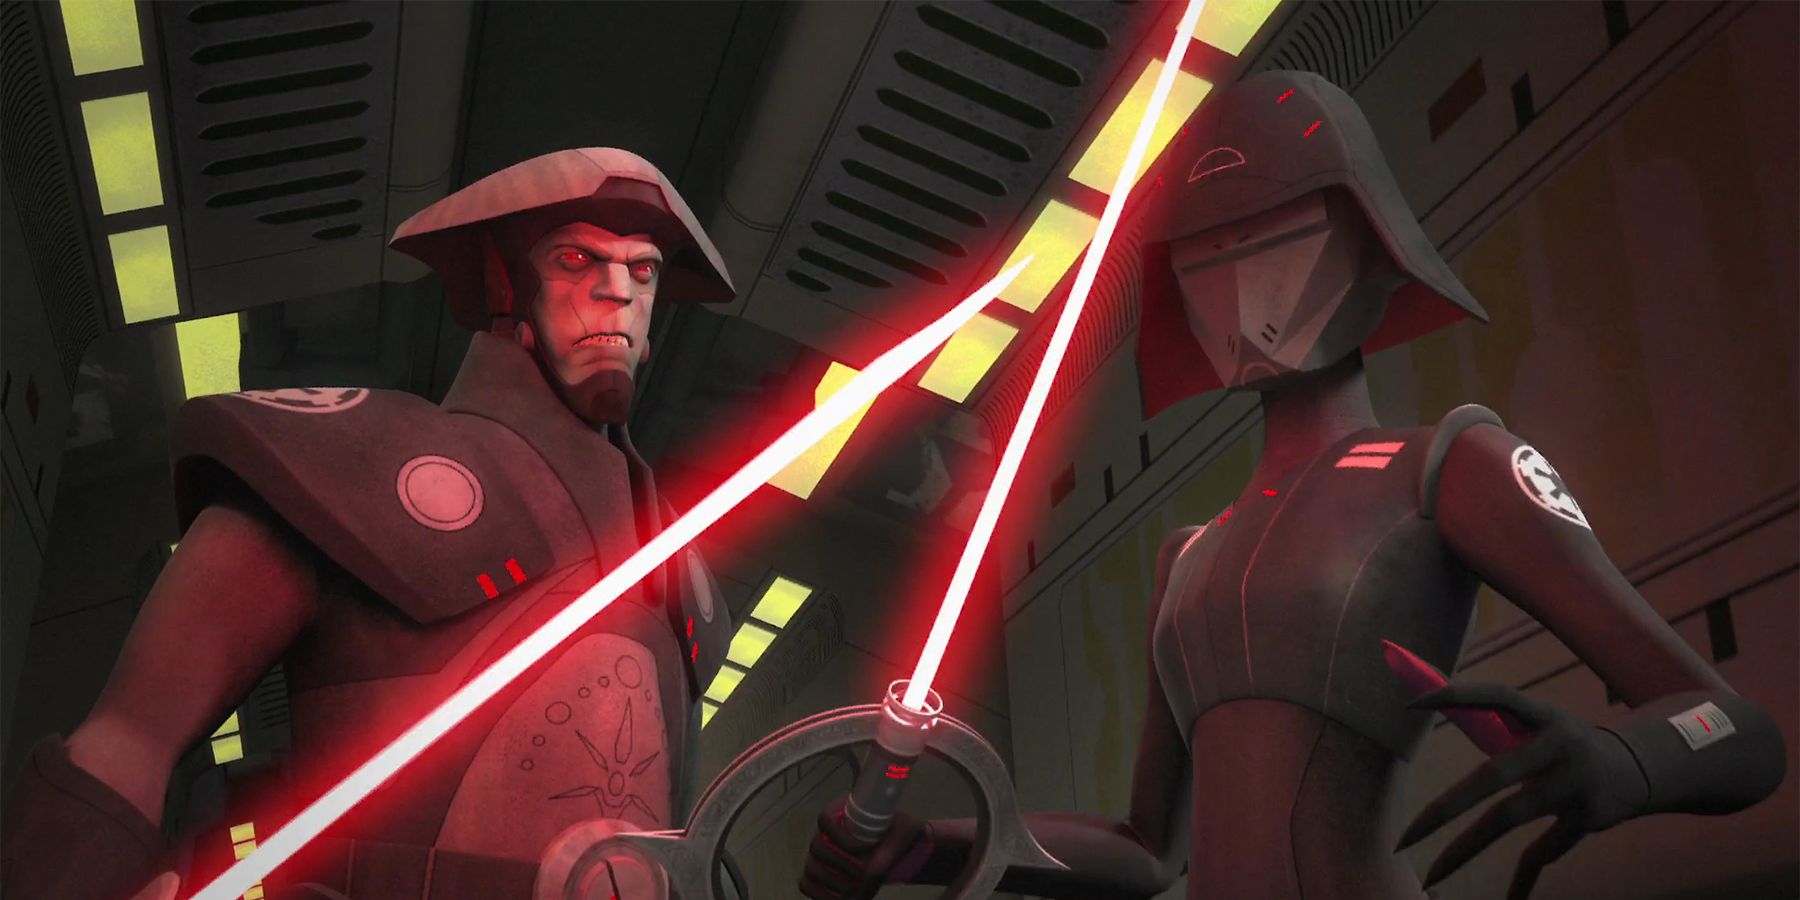  Seventh Sister and Fifth Brother Inquisitors in Star Wars Rebels.